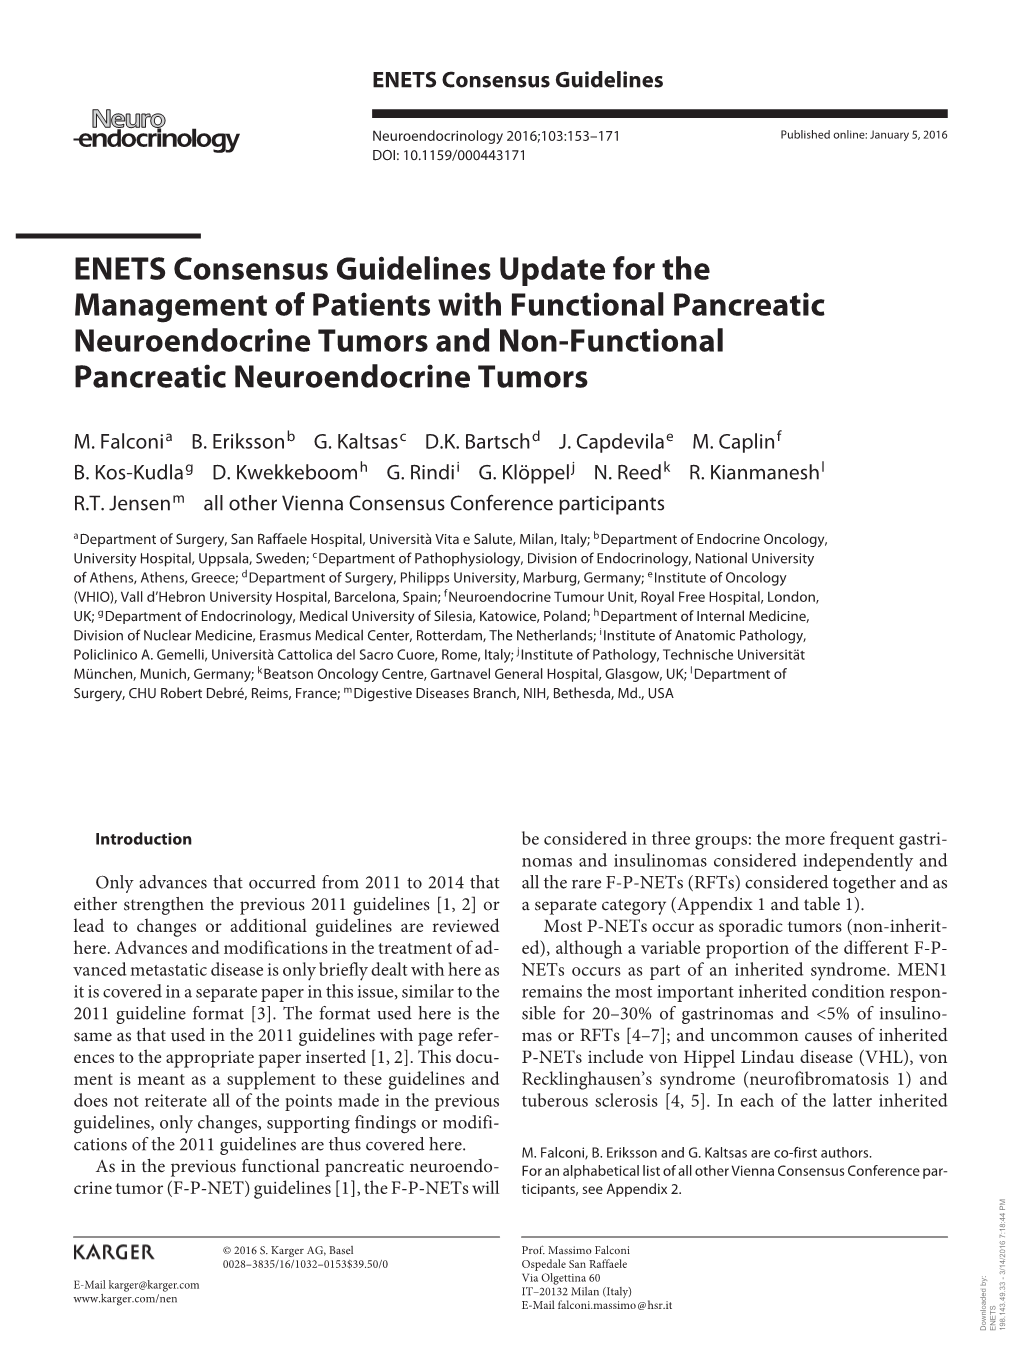 ENETS Consensus Guidelines Update for the Management of Patients with Functional Pancreatic Neuroendocrine Tumors and Non-Functional Pancreatic Neuroendocrine Tumors